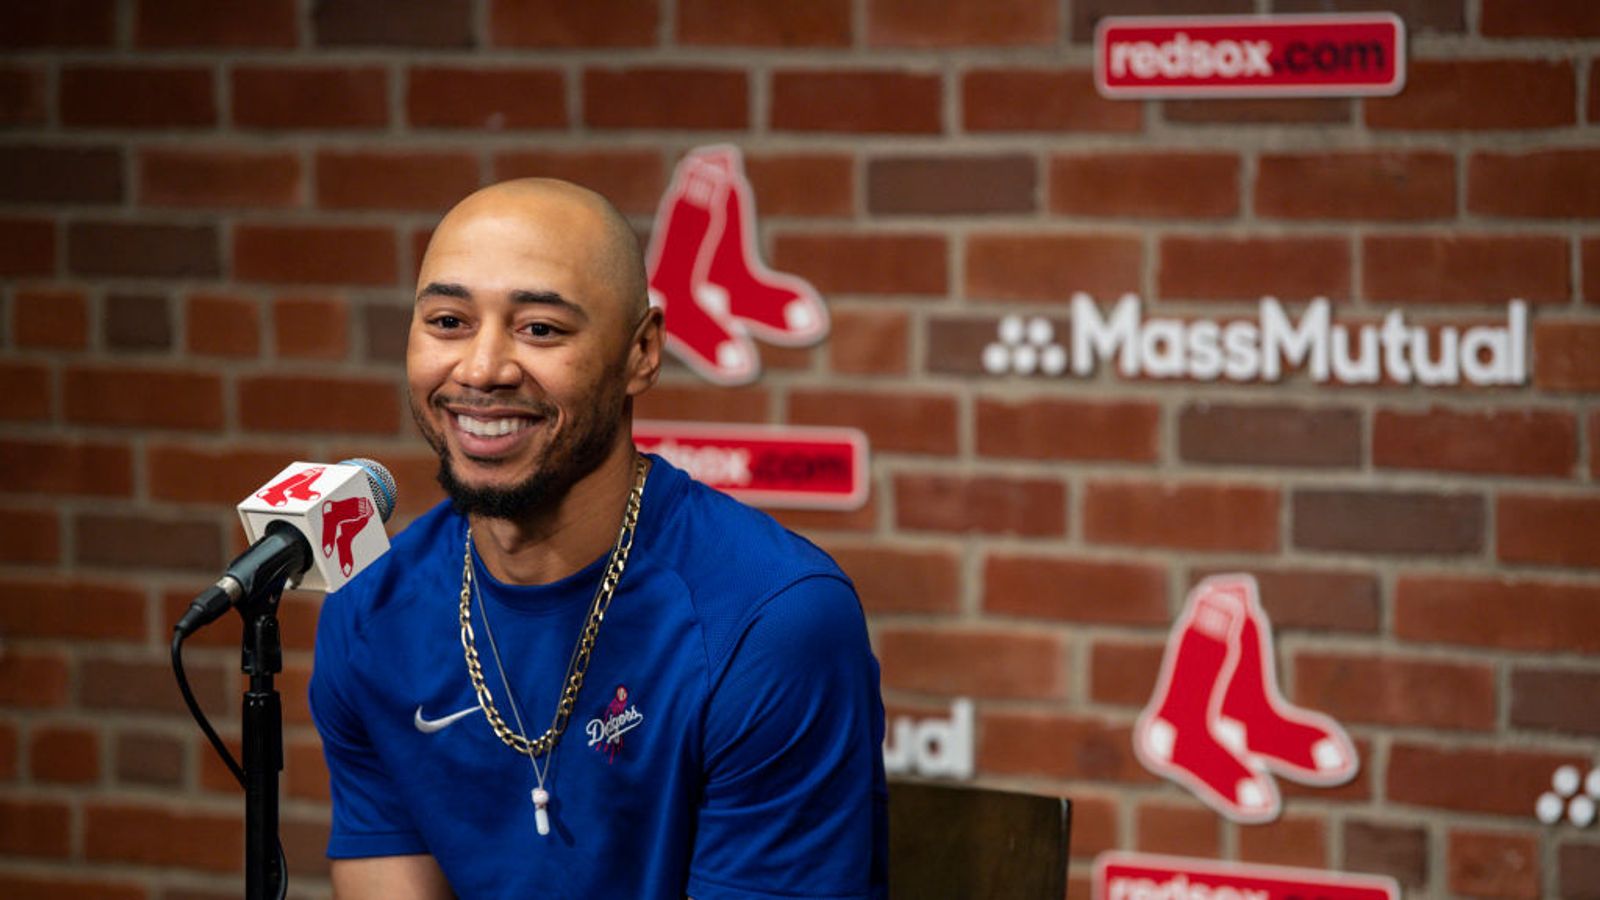 BSJ Live Coverage: Dodgers at Red Sox, 7:10 p.m. - Mookie Betts